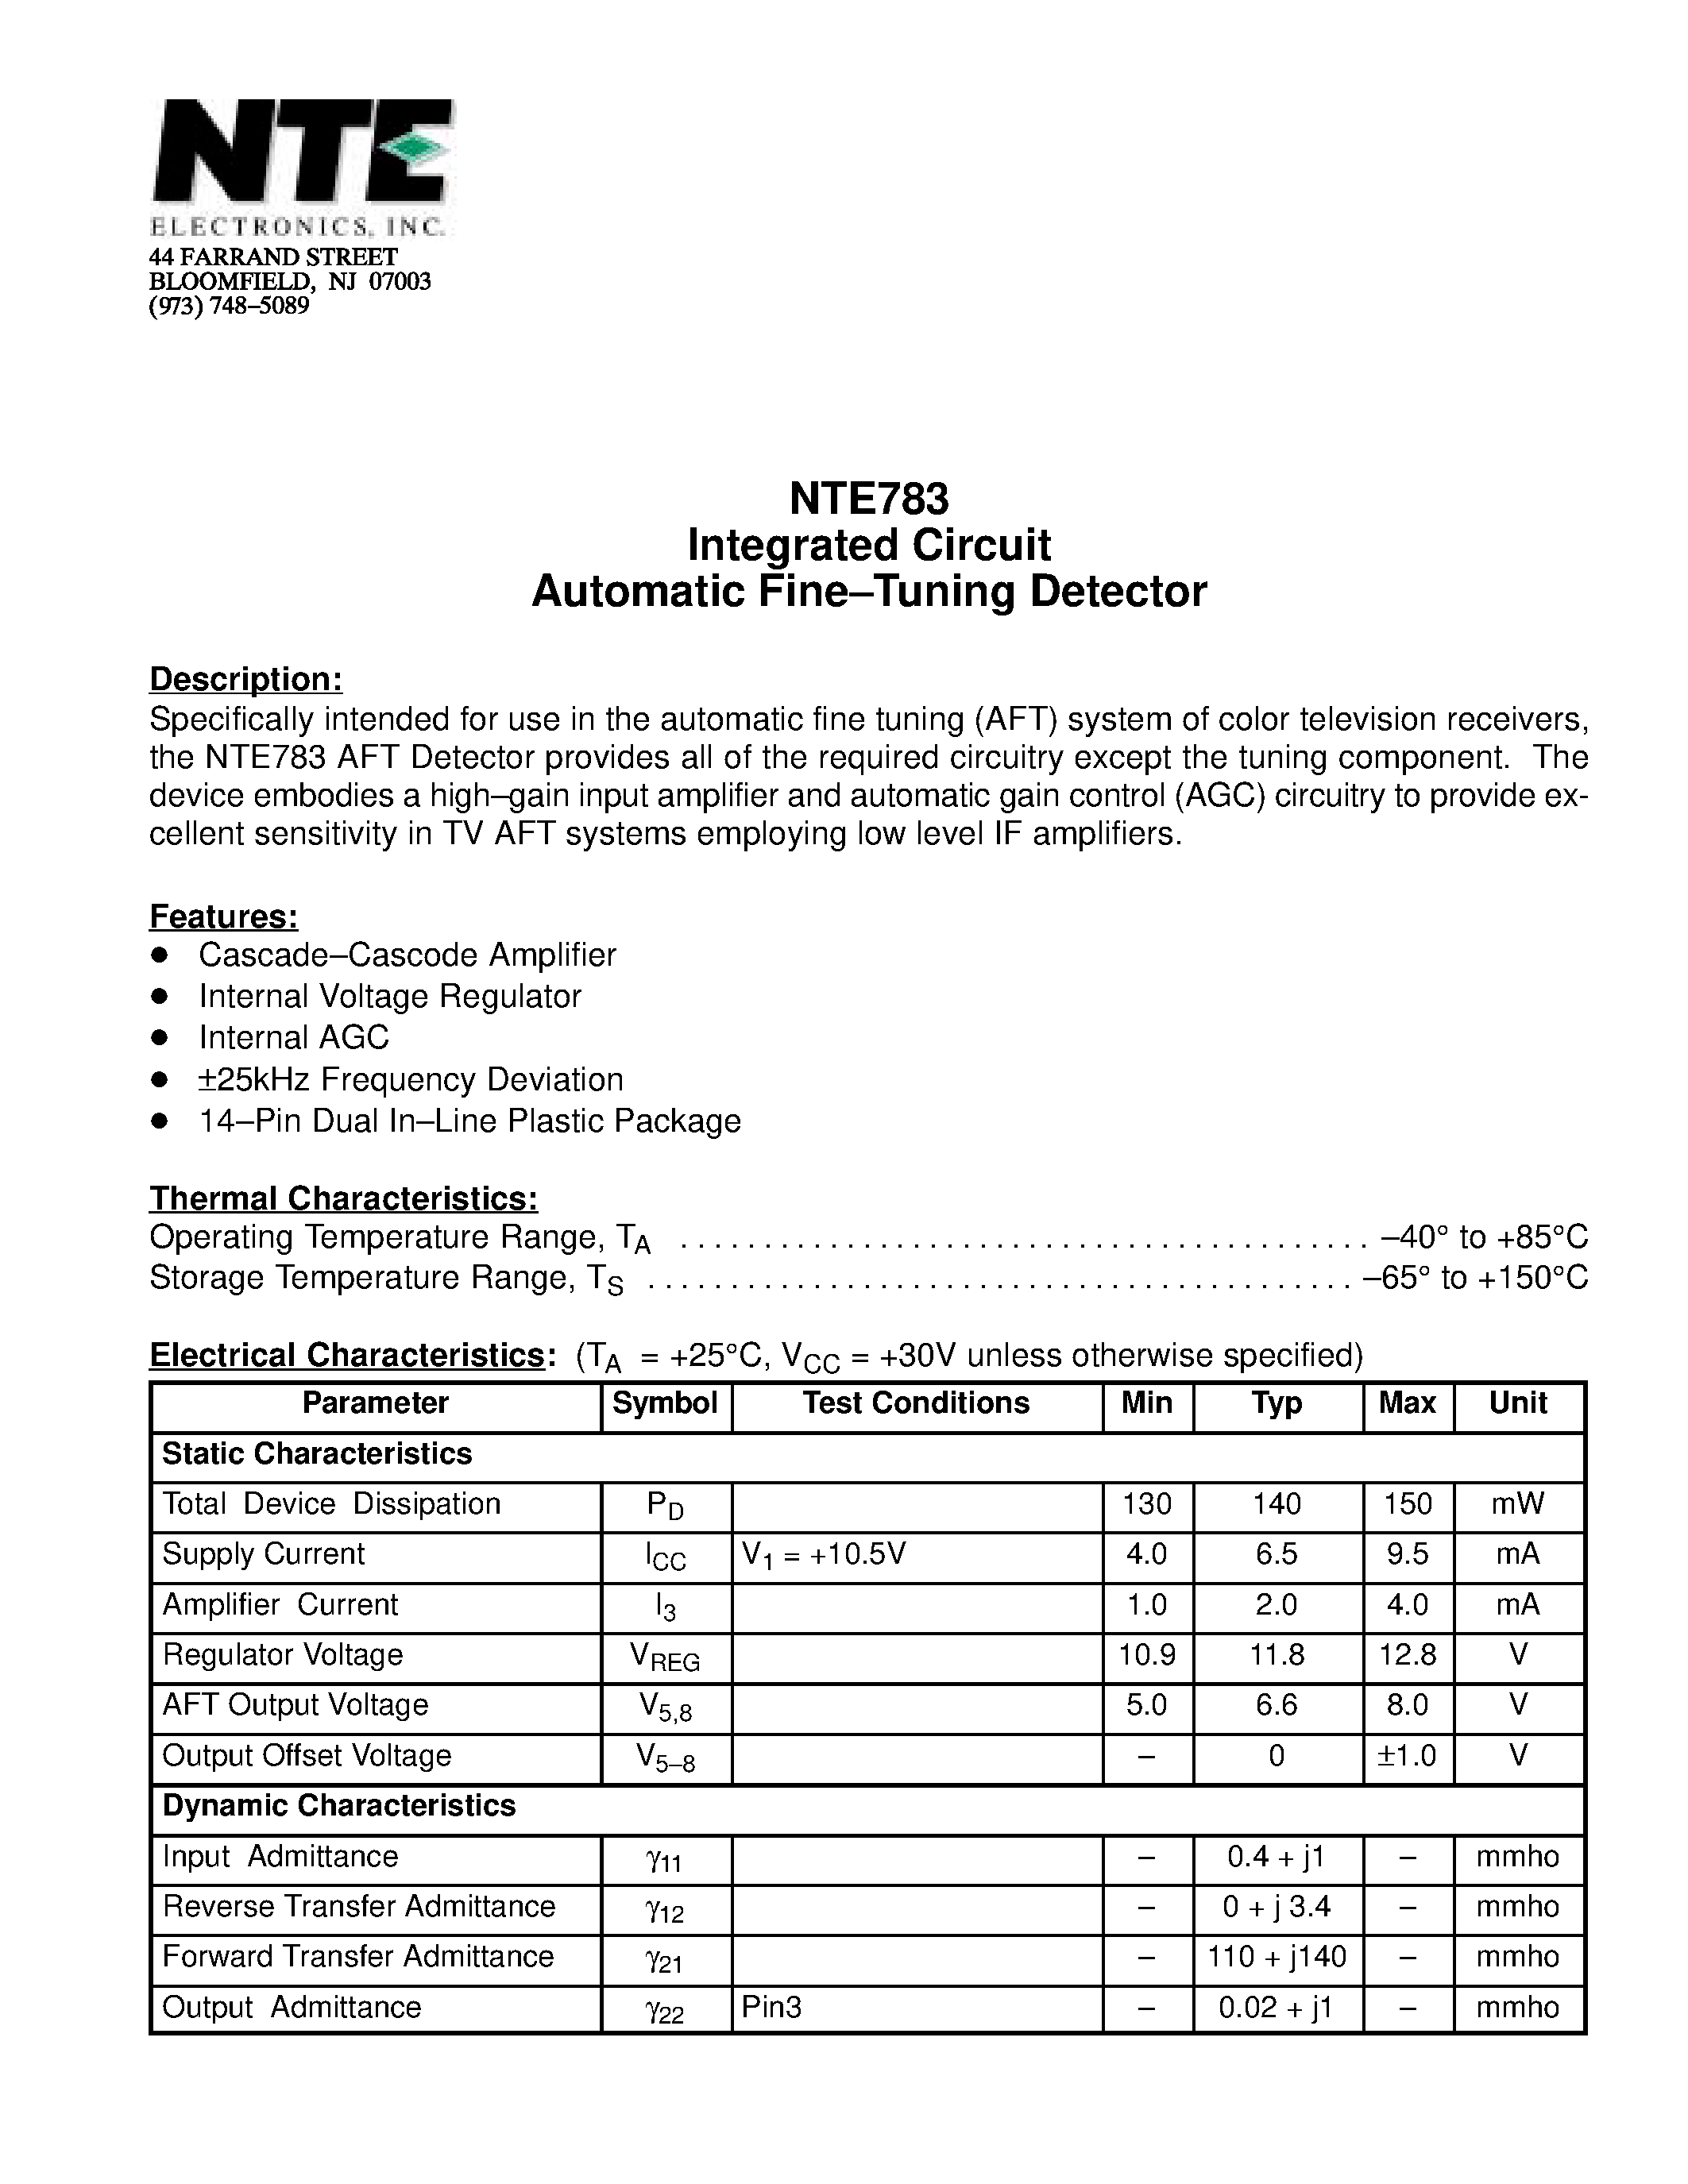 Datasheet NTE783 - Integrated Circuit Automatic Fine-Tuning Detector page 1